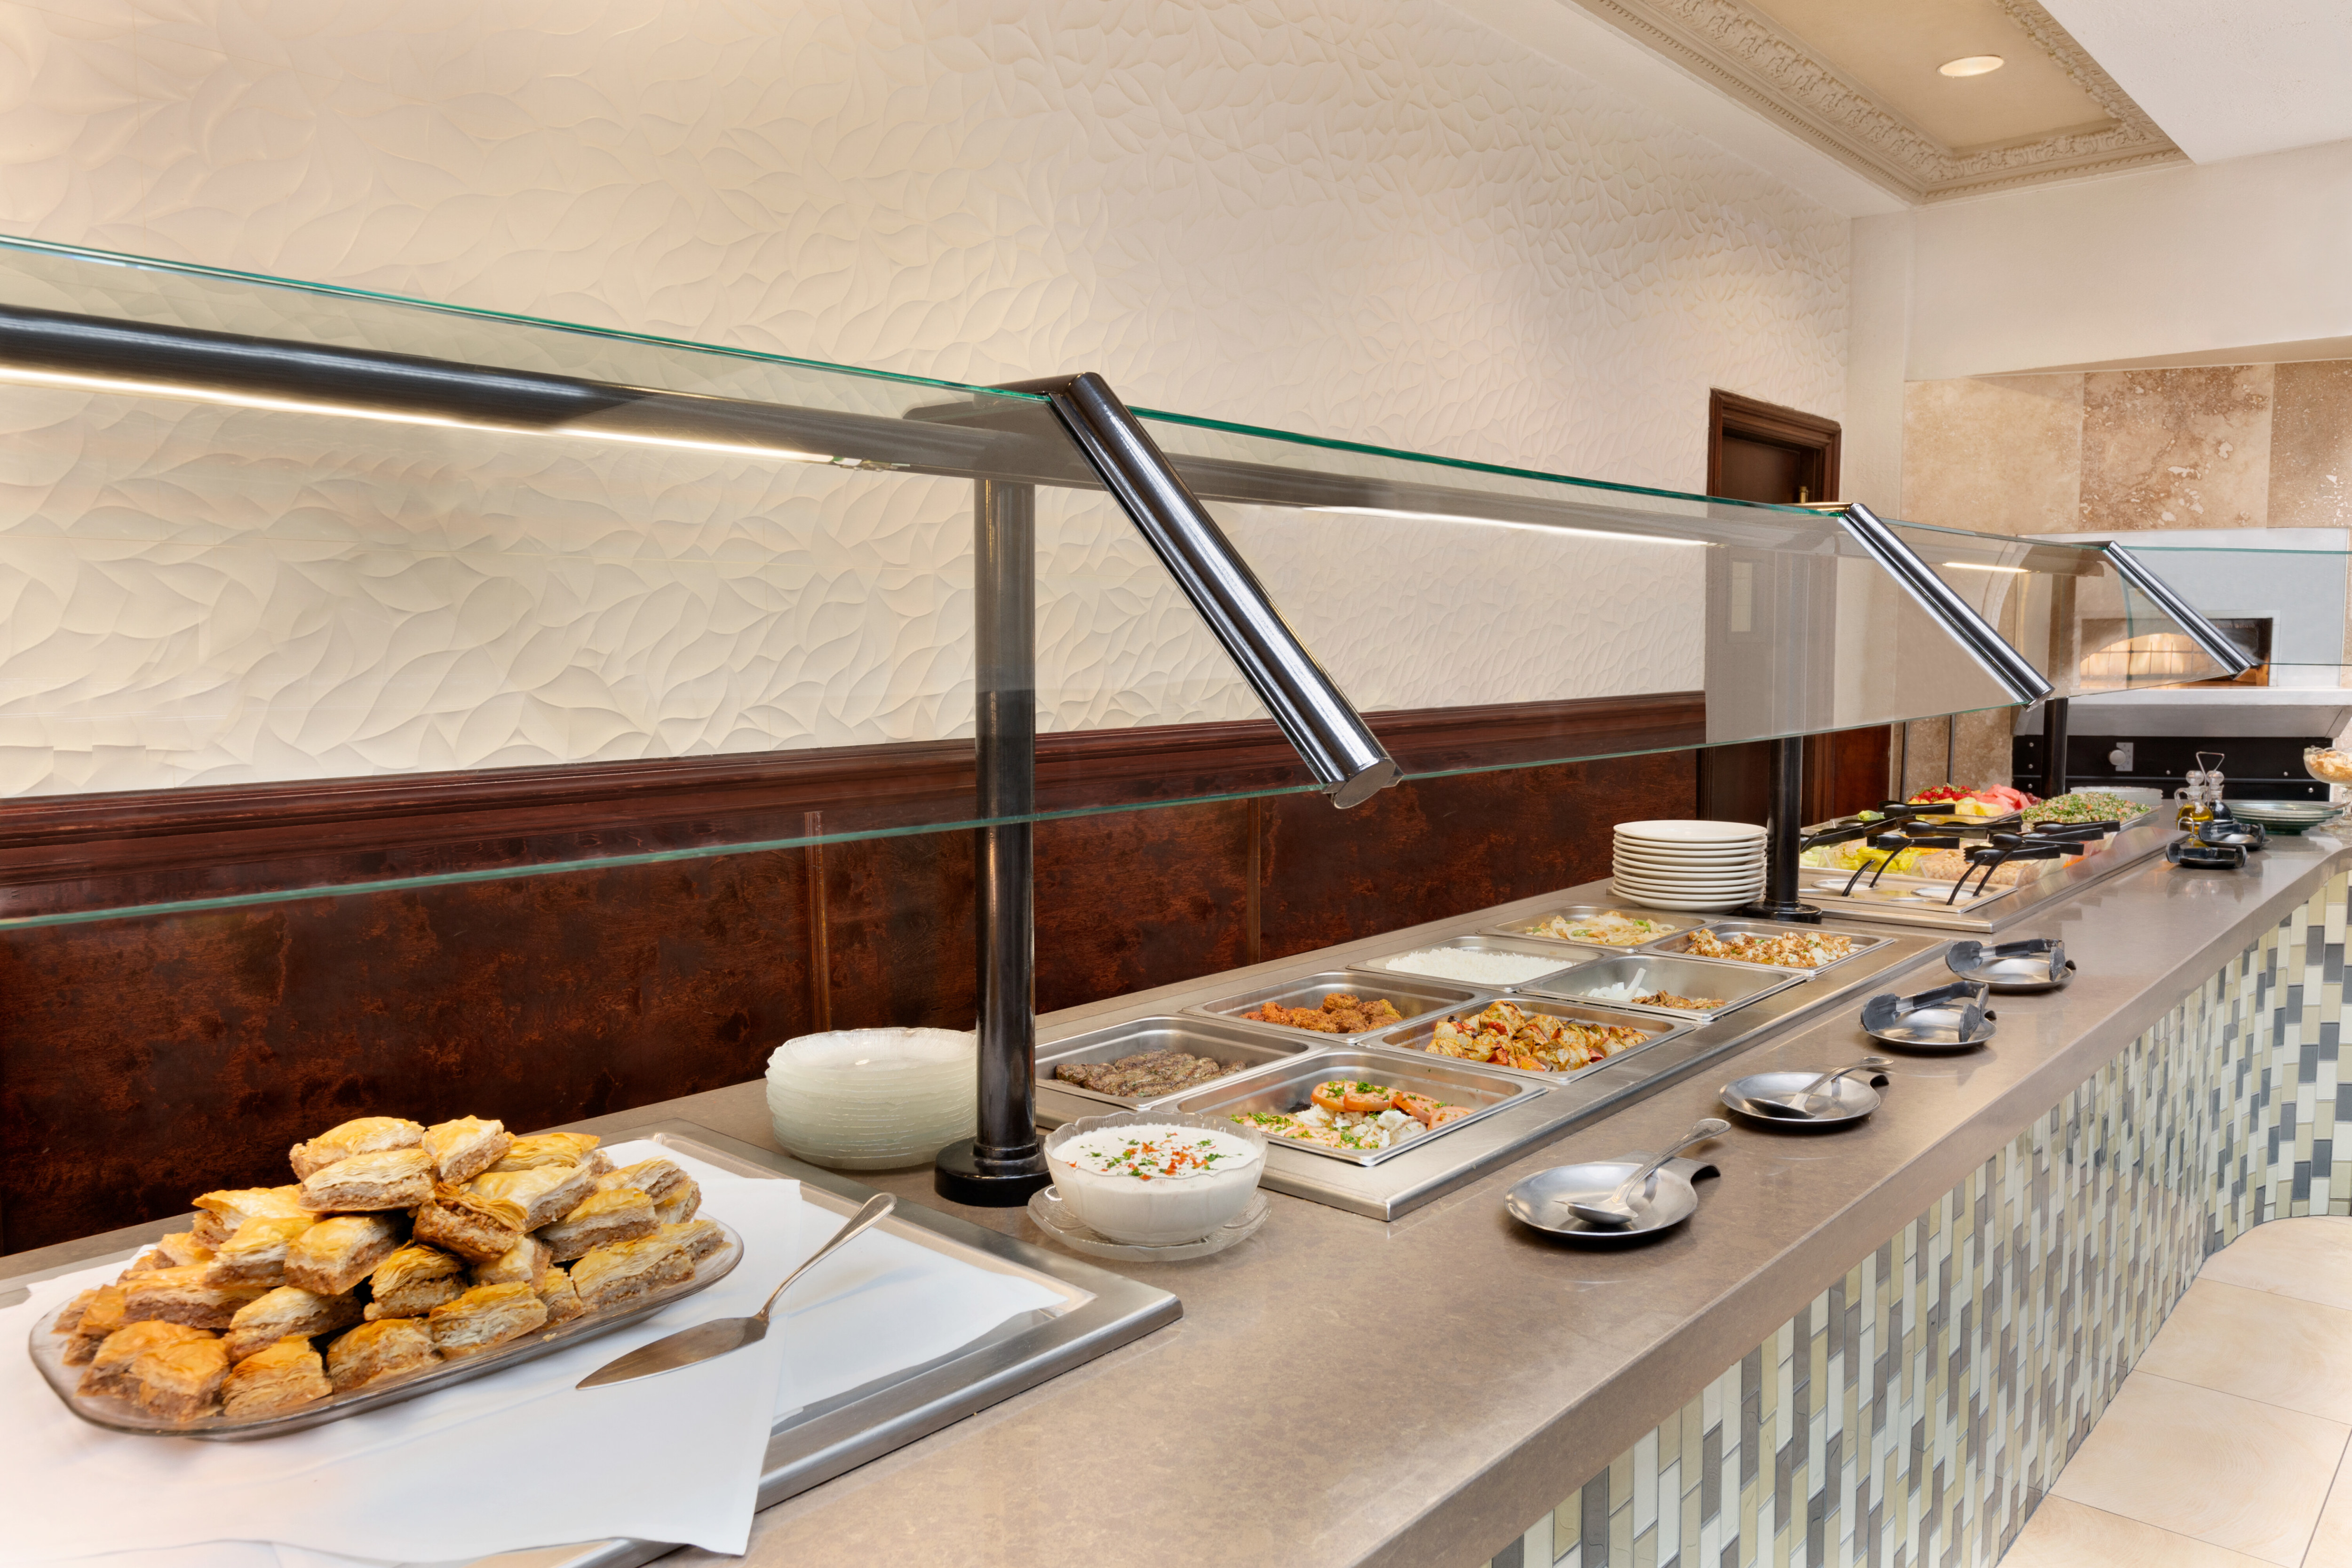 Buffet area with food options